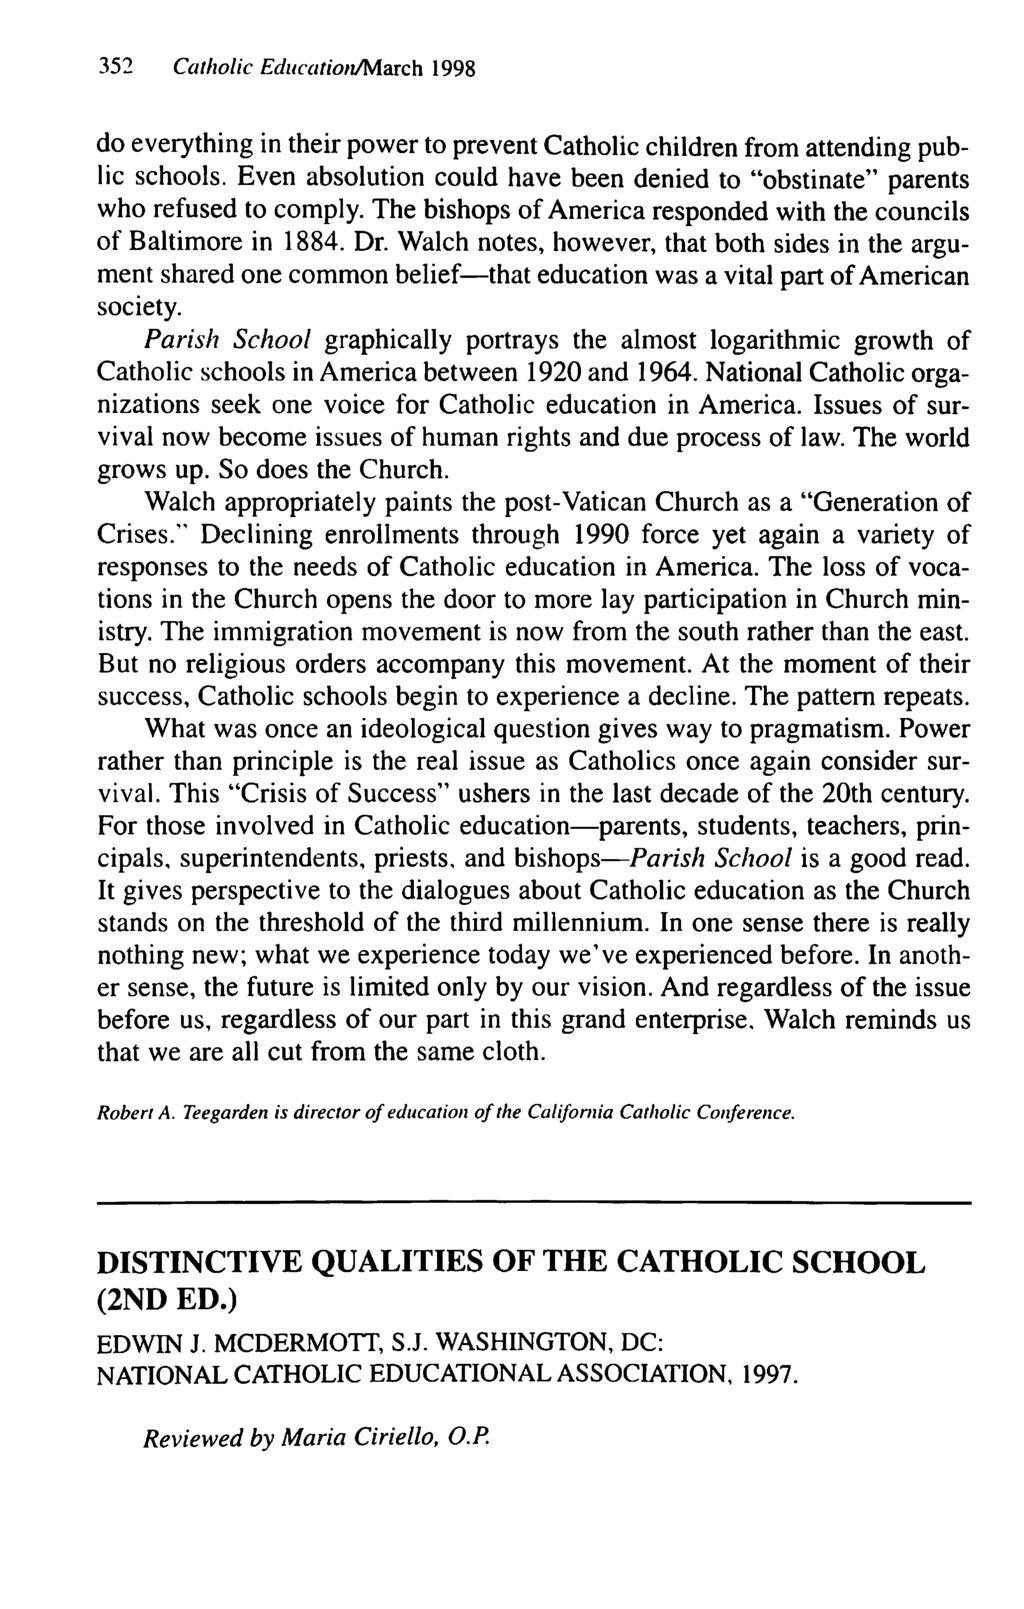 352 Catholic Education/March 1998 do everything in their power to prevent Catholic children from attending public schools.